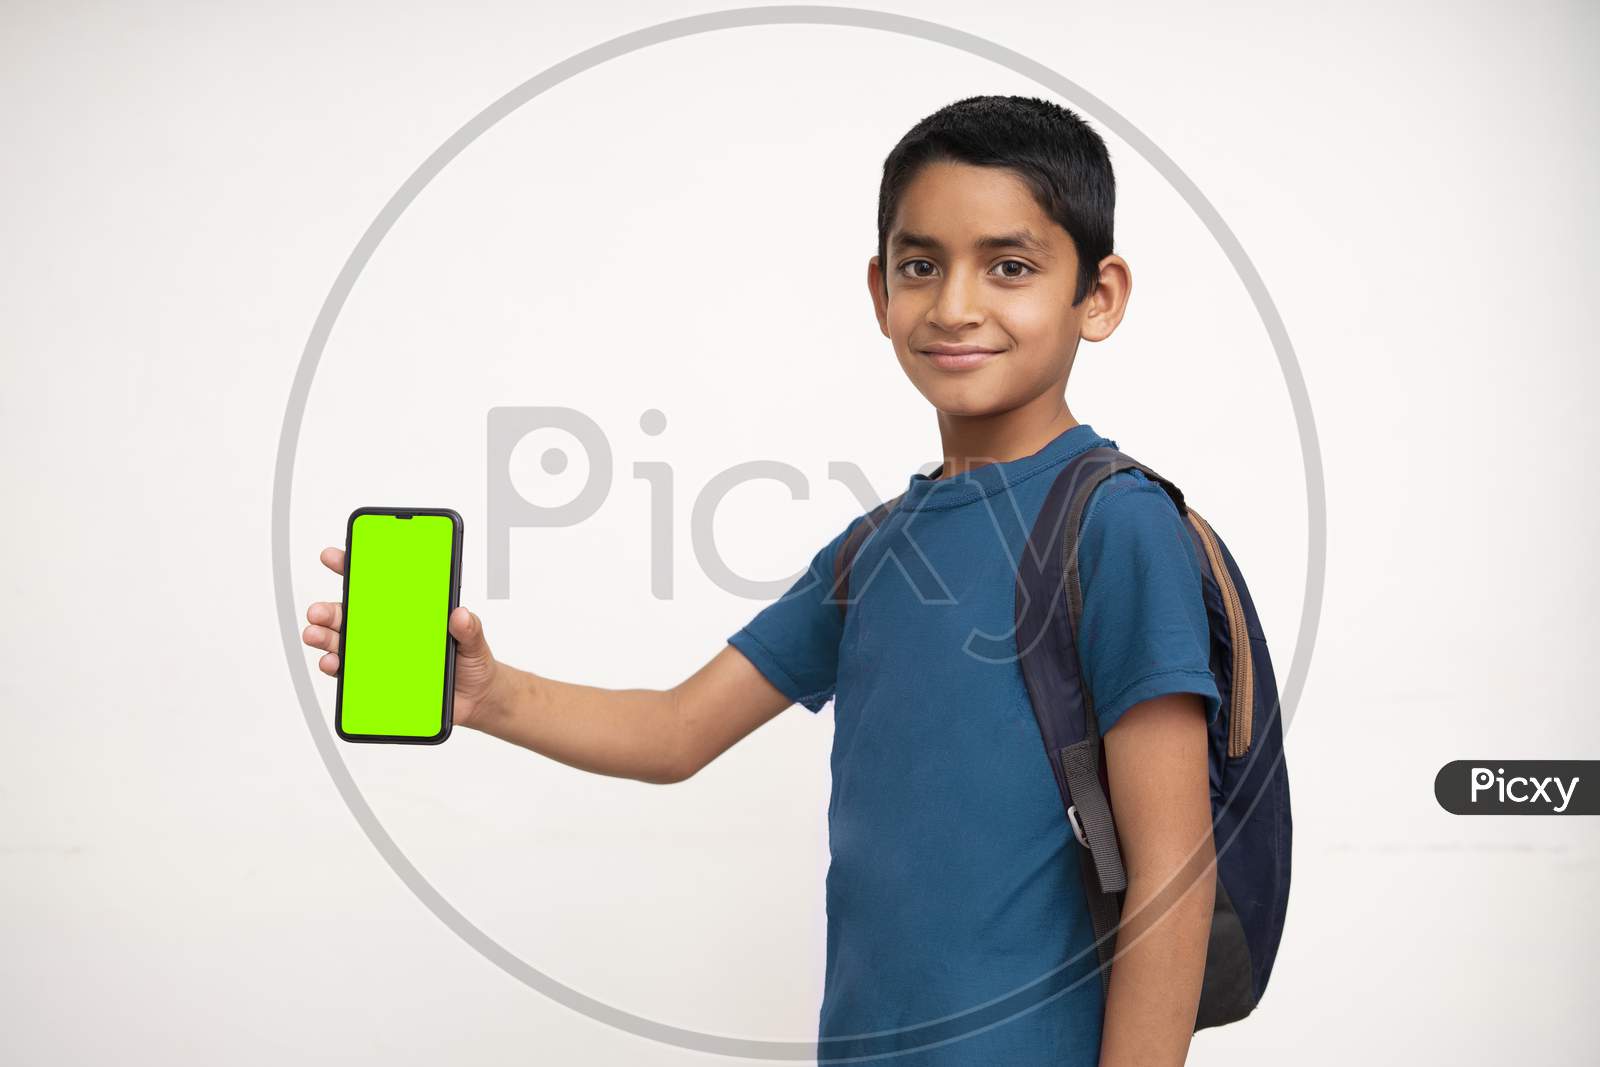 Young Indian Kid Holding A Phone In His Hand With A Green Screen, School Bag In His Back And Wearing Blue T-Shirt Standing On White Isolated Background.